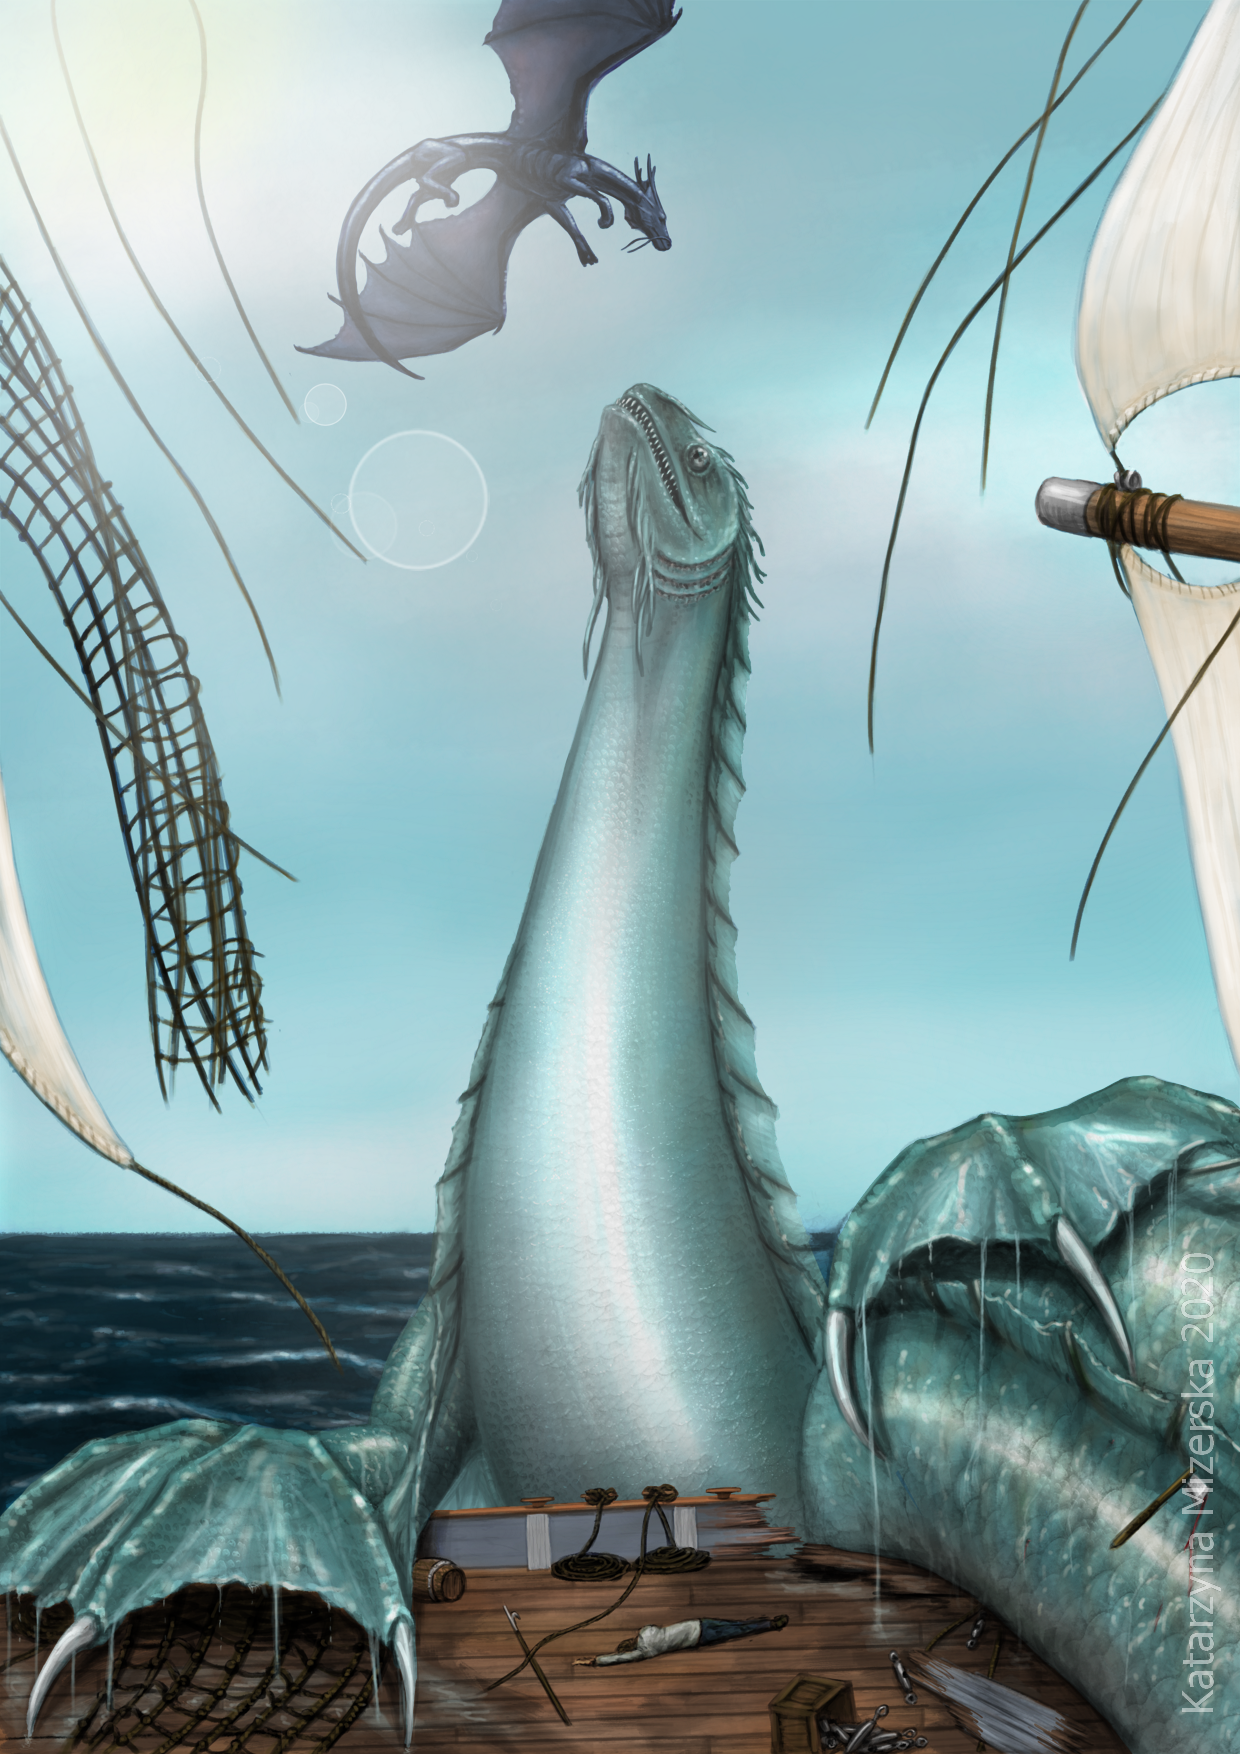 Sea serpent attacking a ship and being fended off by a dragon